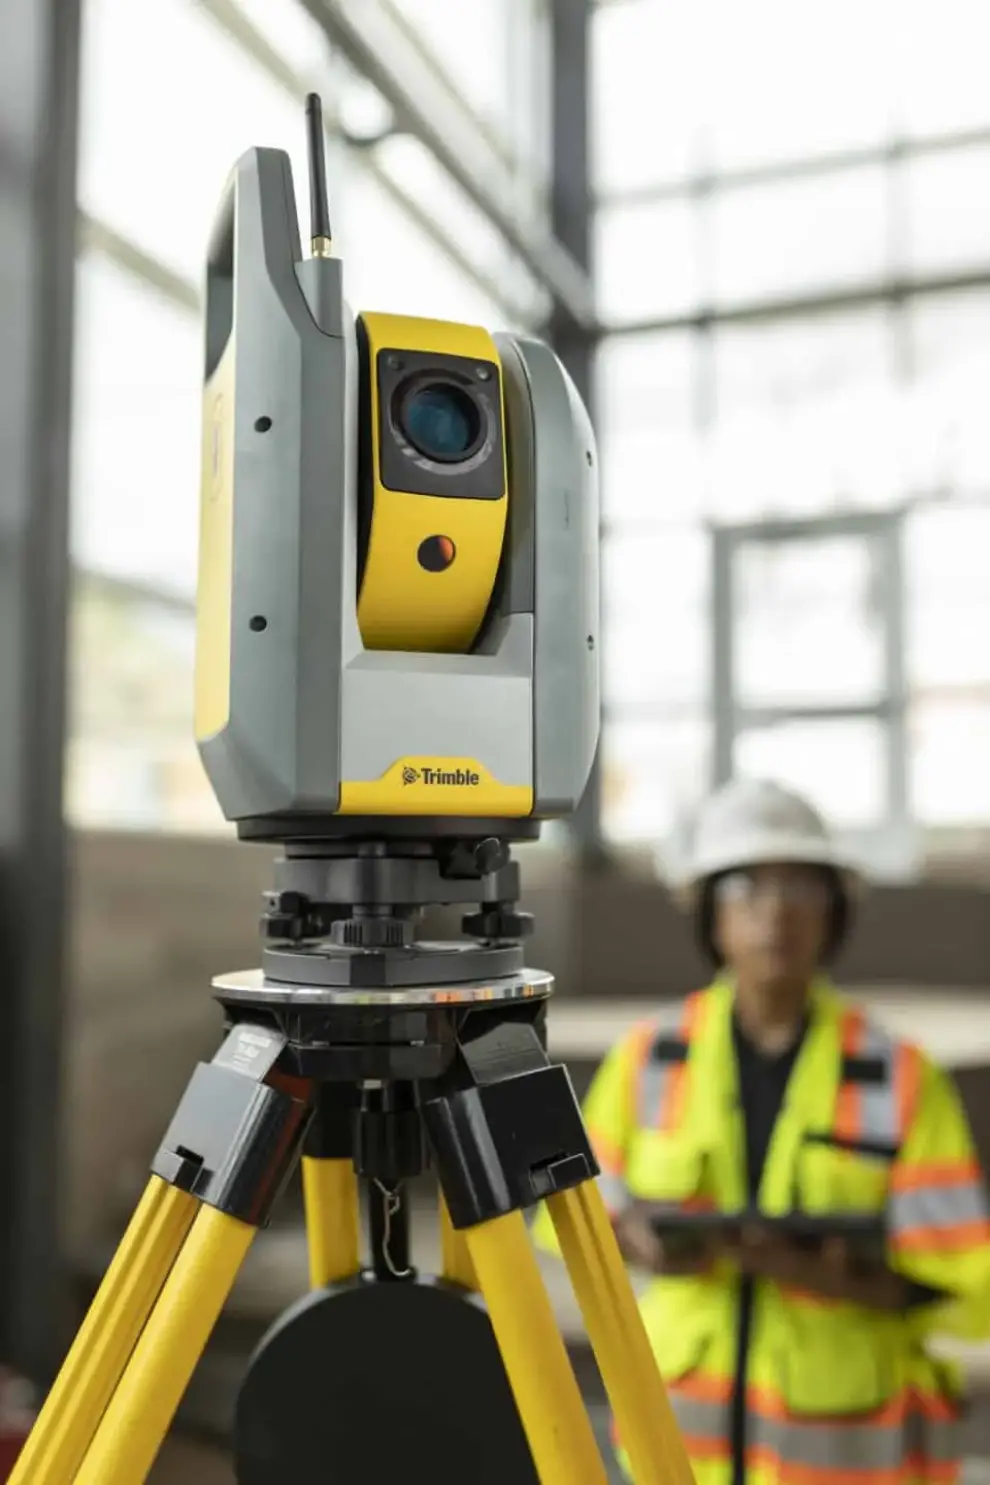 Trimble’s Sets New Standard for Robotic Total Station Scalability